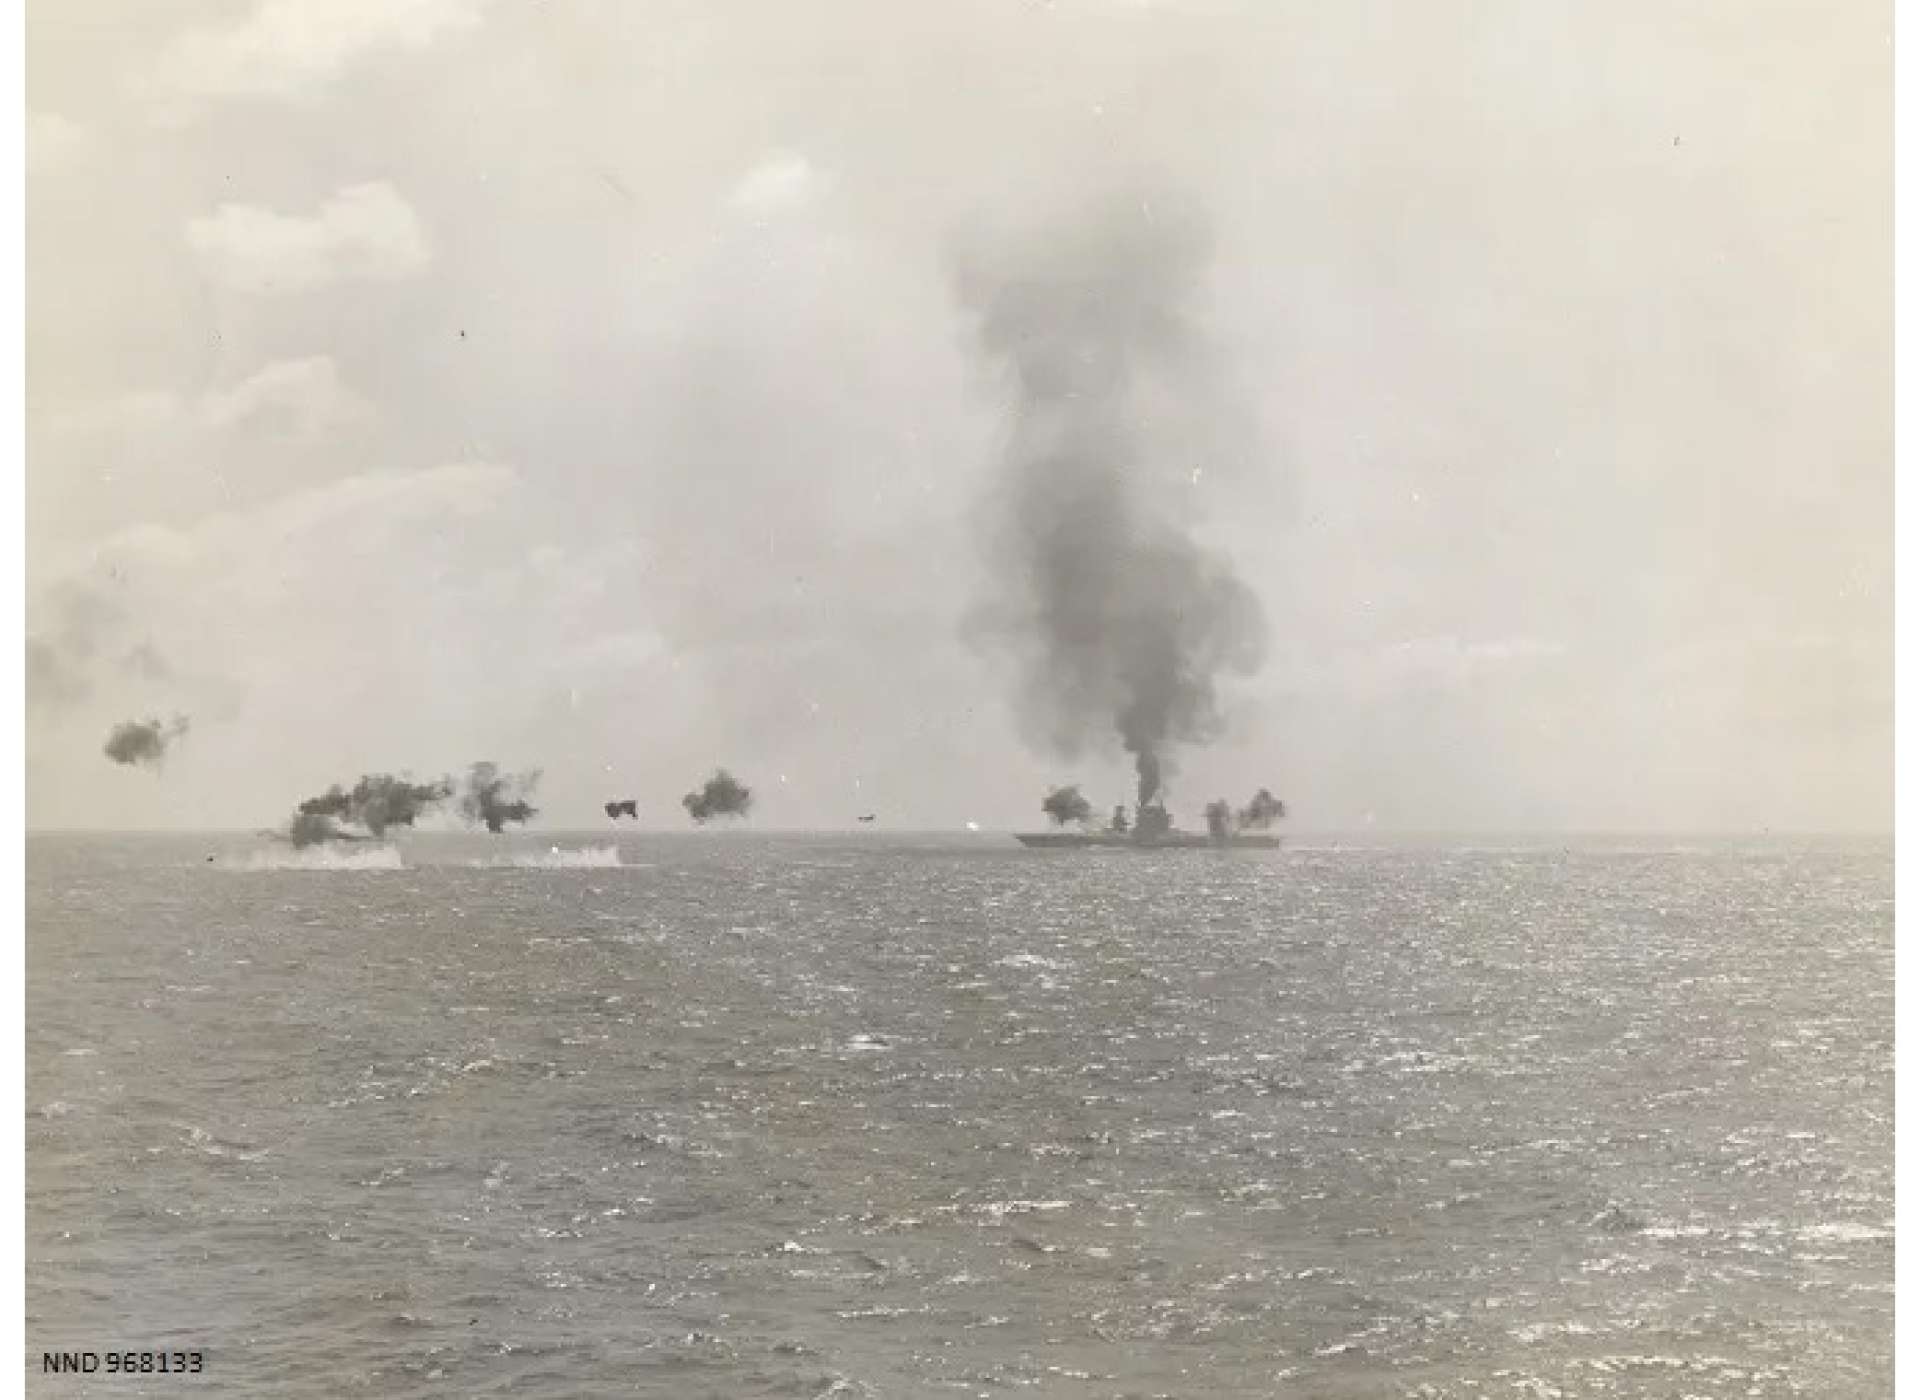 The USS Lexington after the initial torpedo hits. A Japanese torpedo plane is approaching from the left. Official US Navy photograph courtesy of the National Archives and Records Administration.